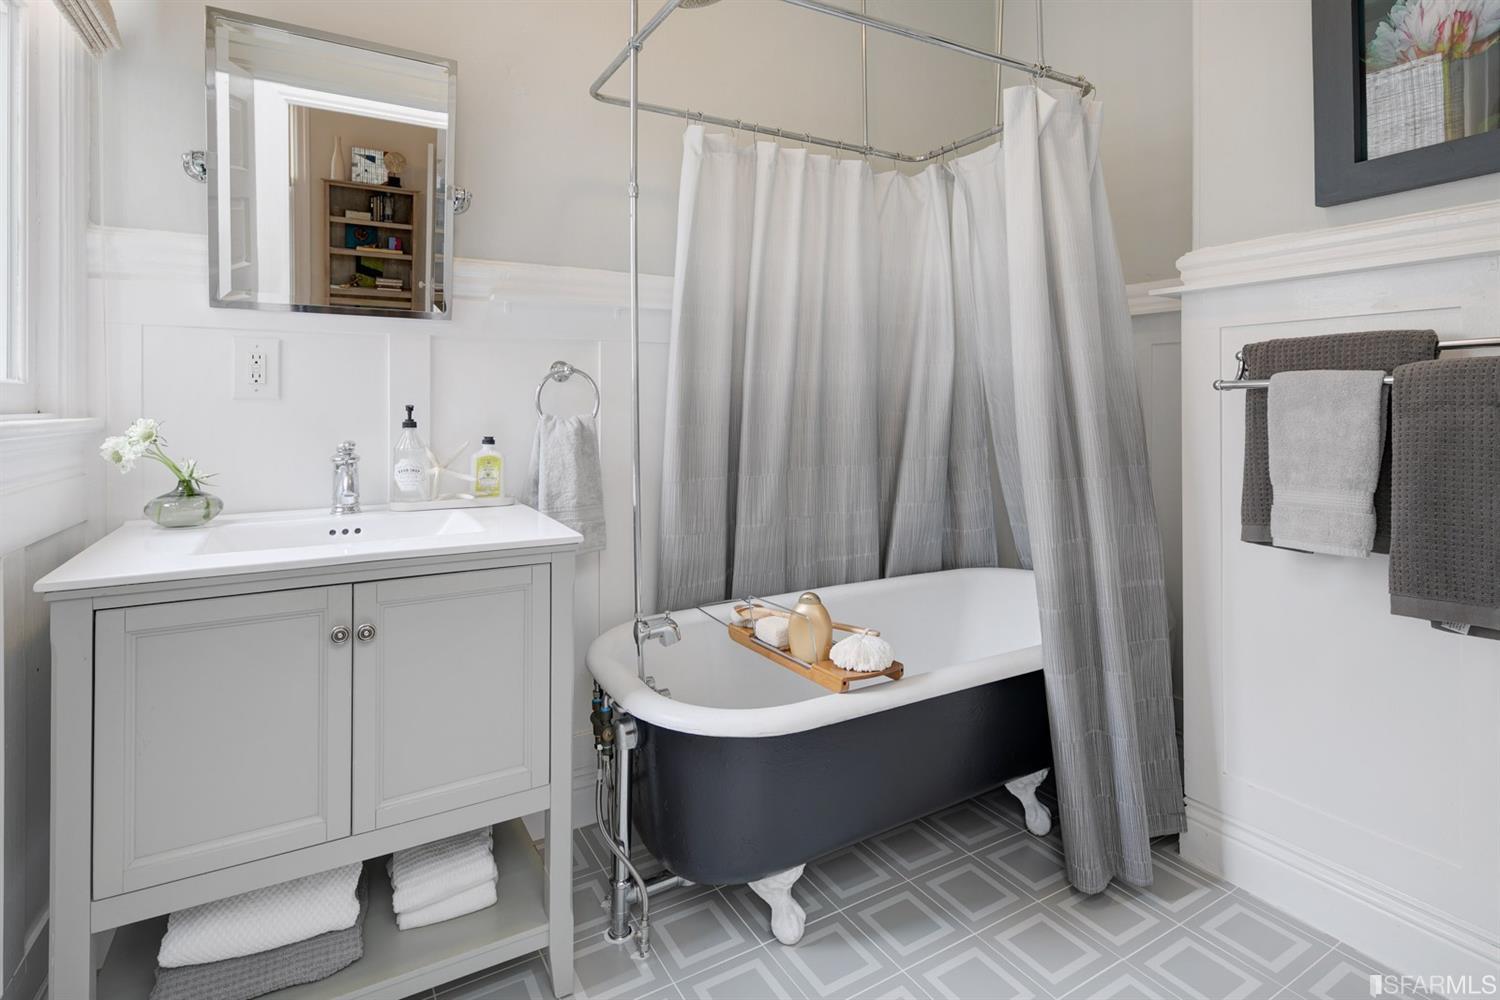 Property Photo: Bathroom with free-standing bath tub and white wainscoting